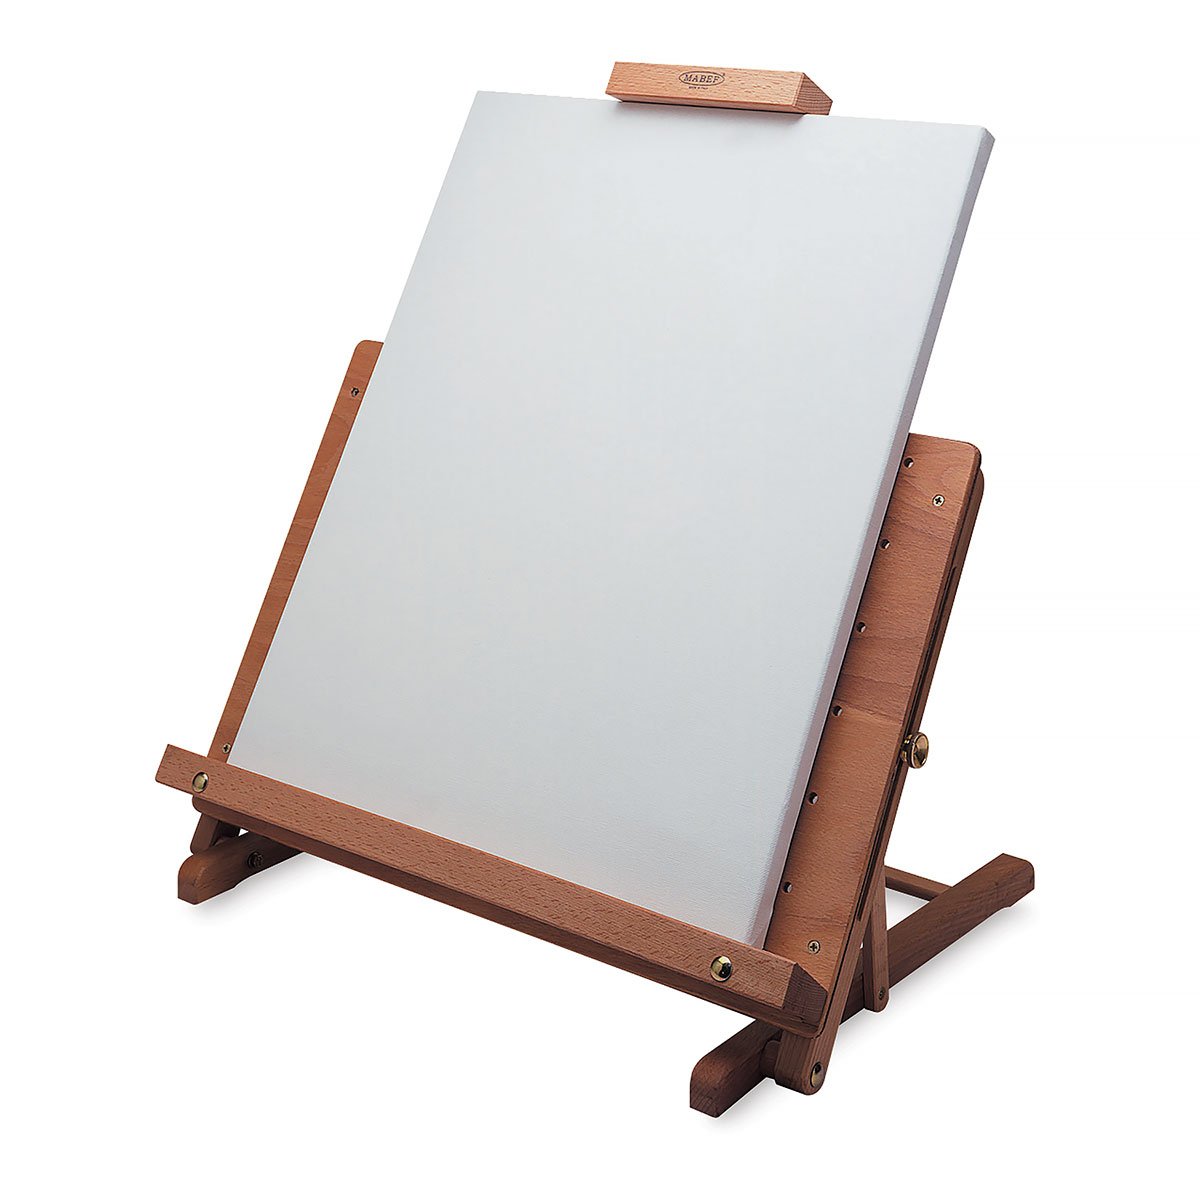 Mabef Basic Table Easel